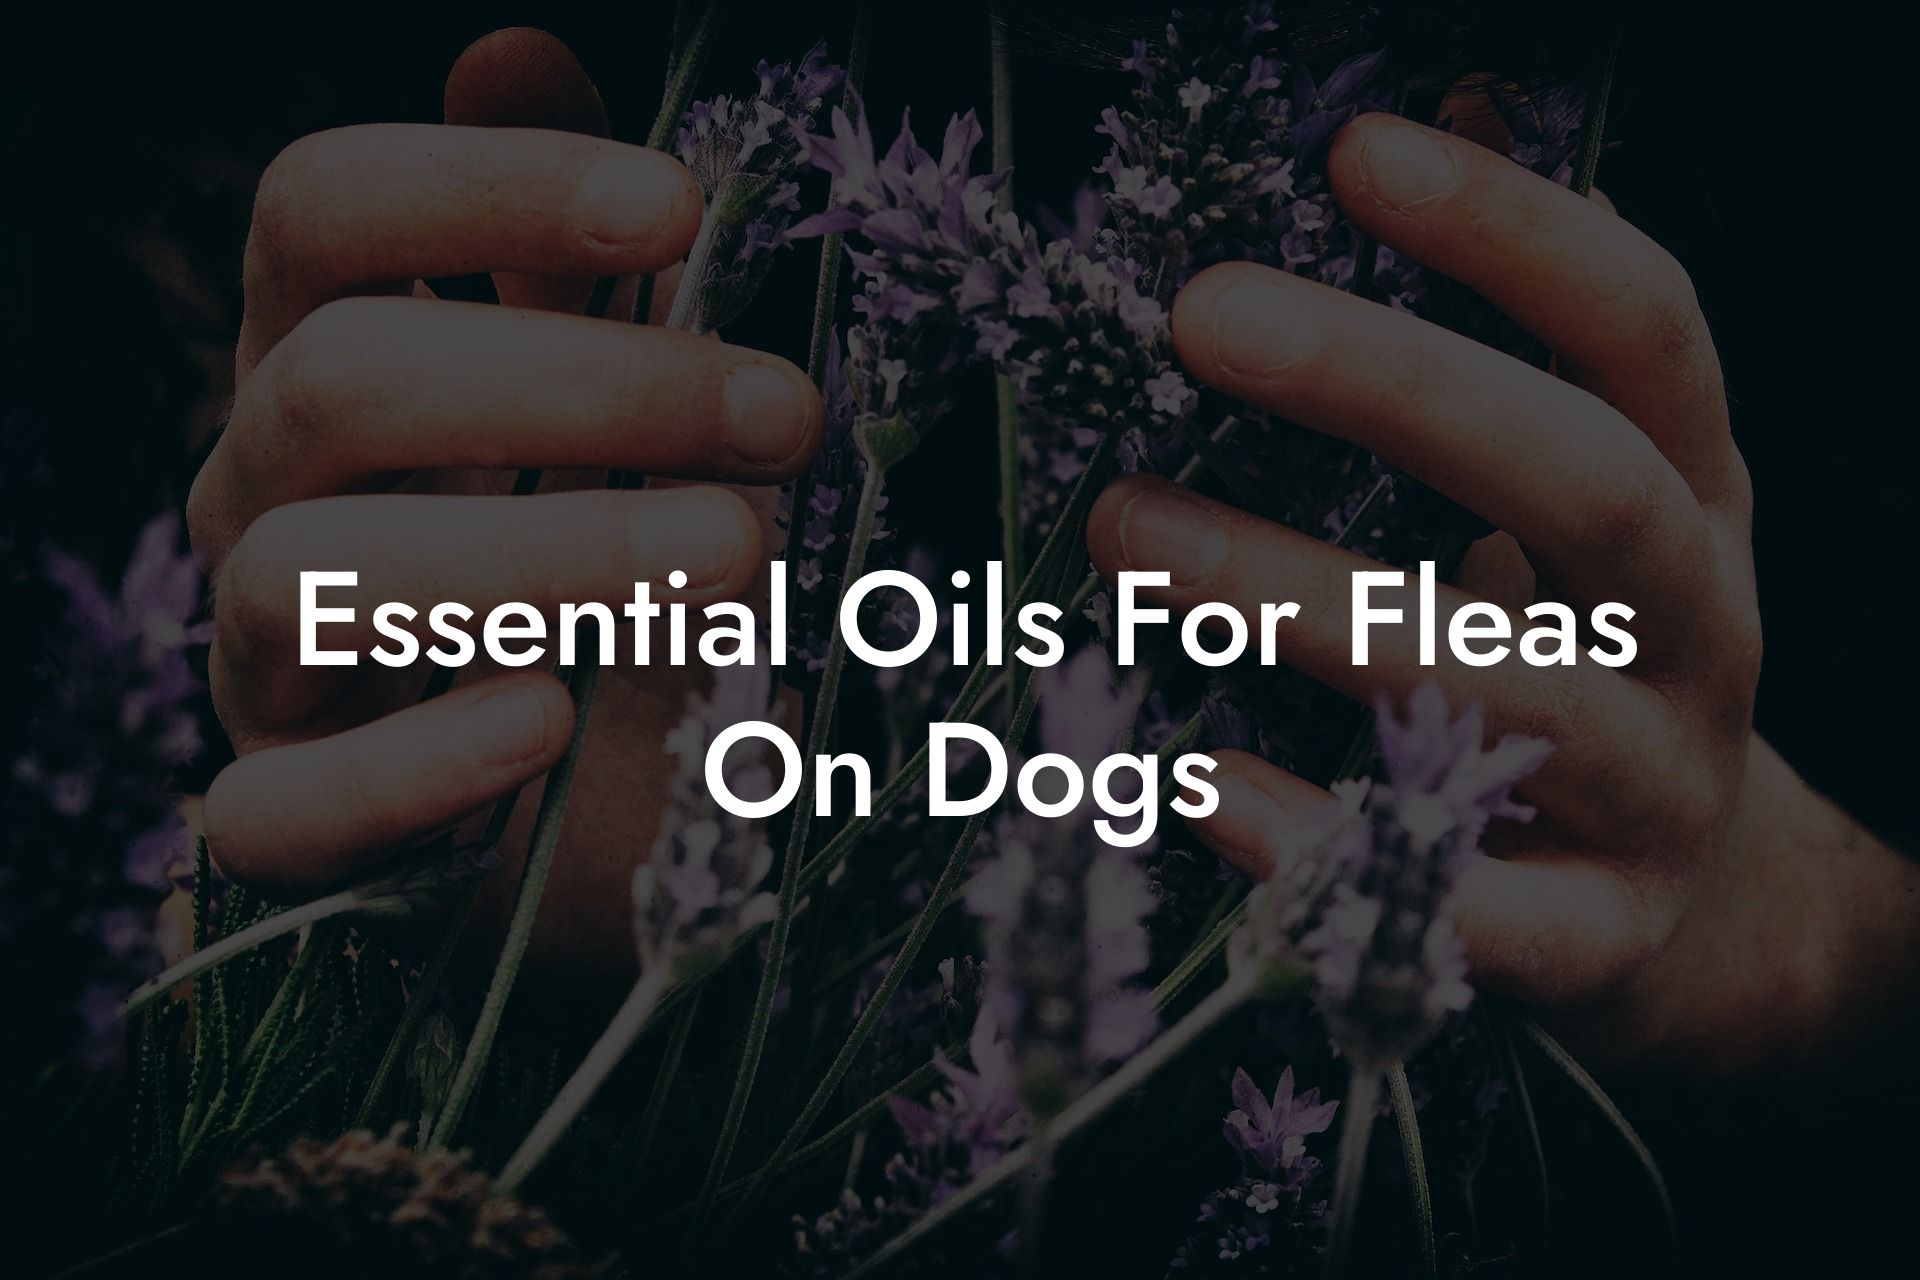 Essential Oils For Fleas On Dogs